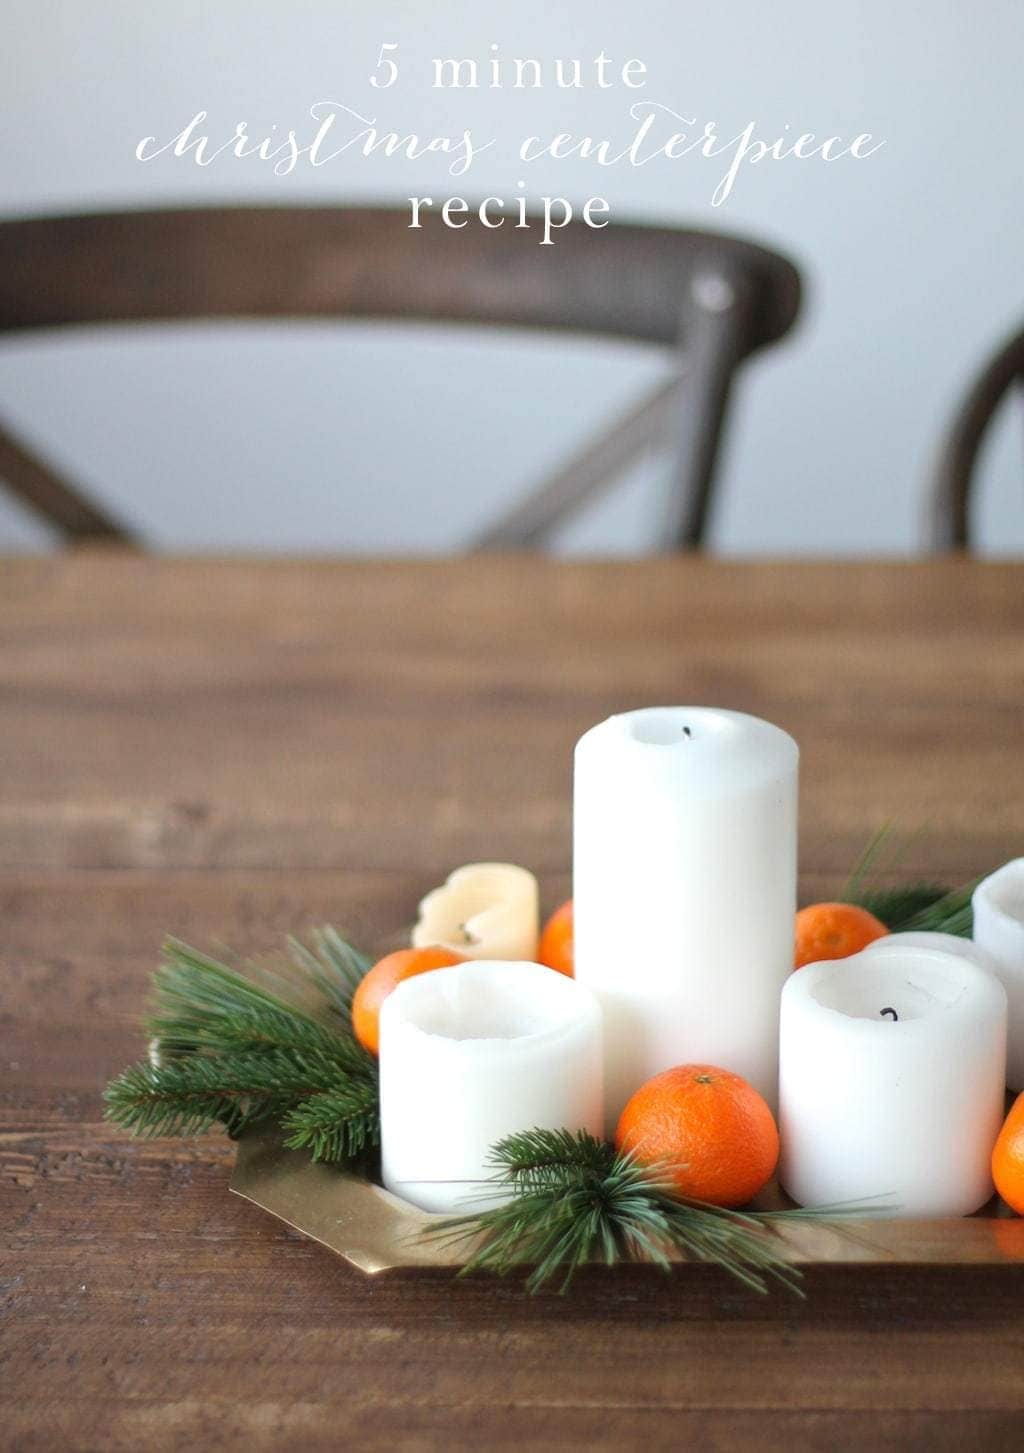 A 5 minute Christmas centerpiece recipe made with items from your home